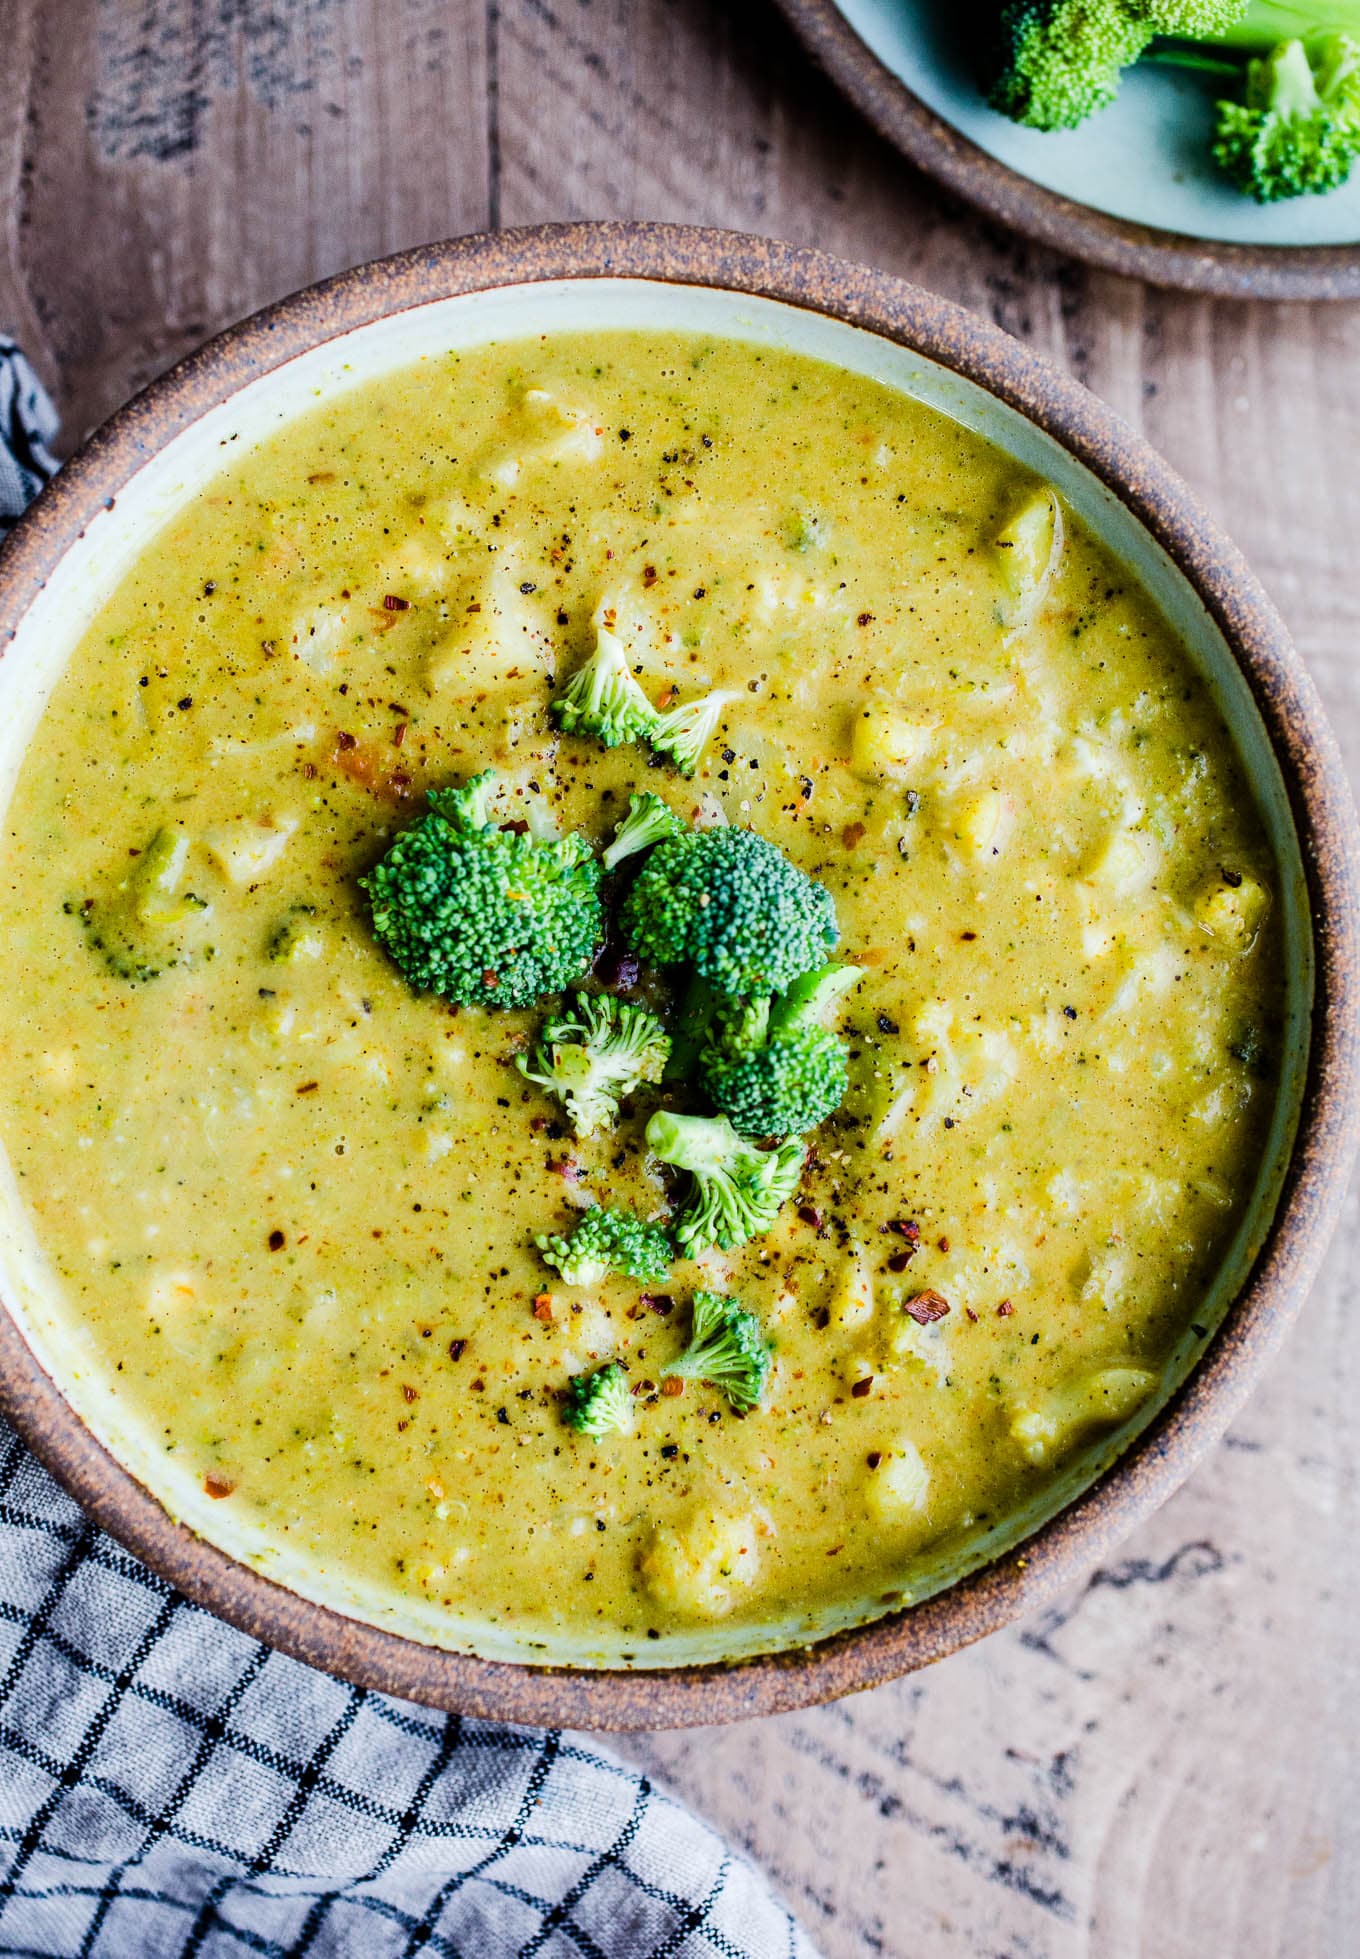 Curried cauliflower soup with broccoli in a rustic bowl on a wooden surface.